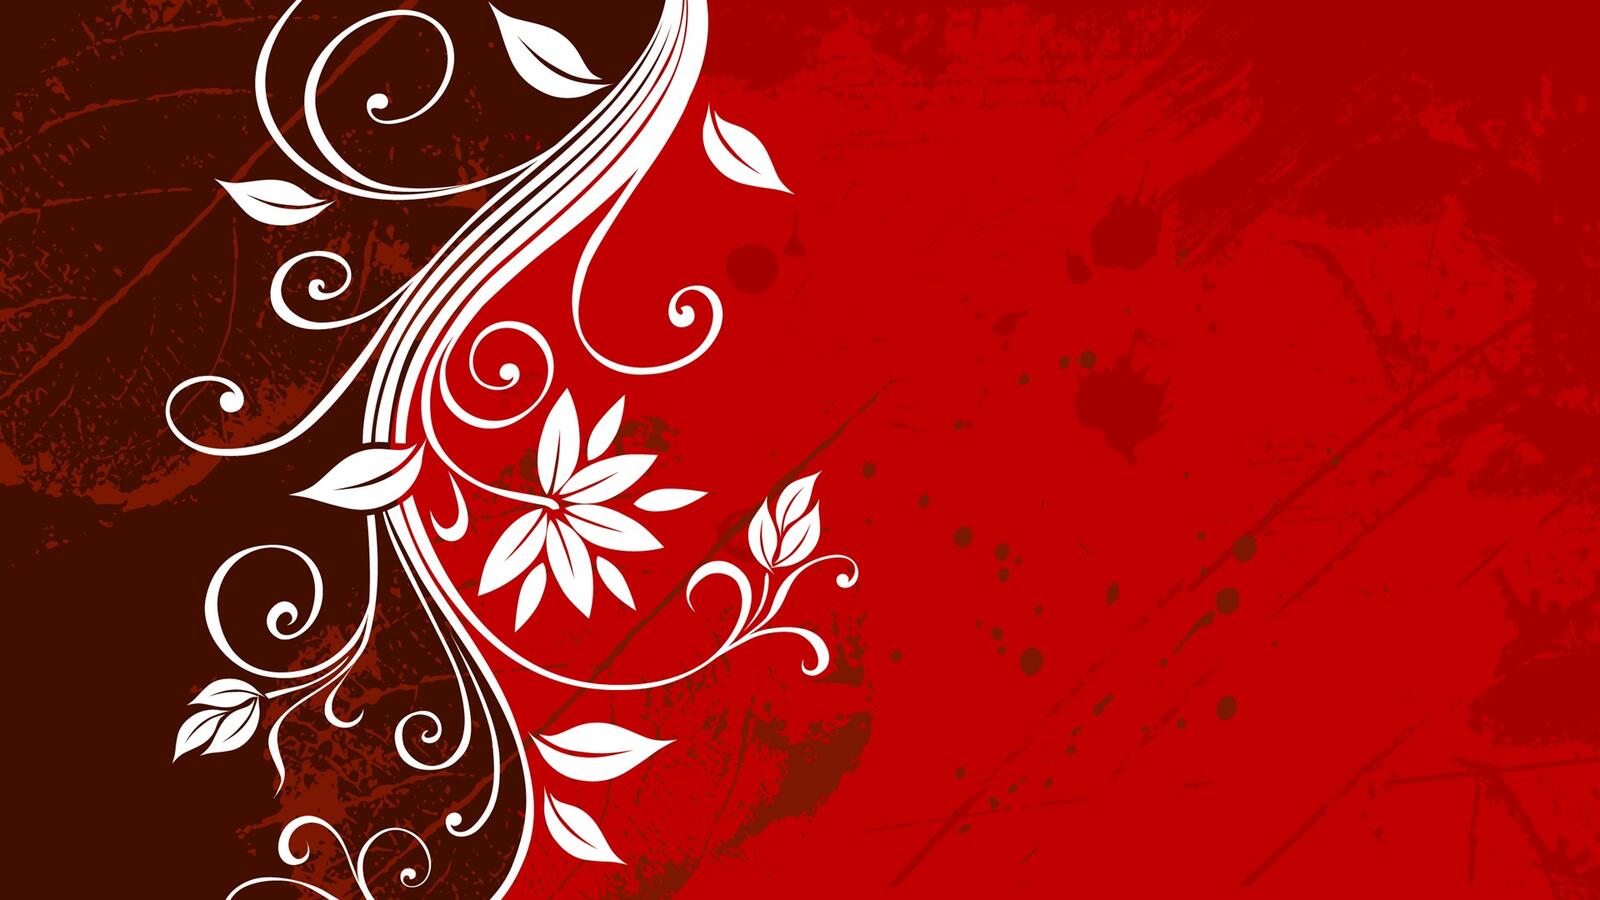 Wallpapers floral graphics grunge on the desktop